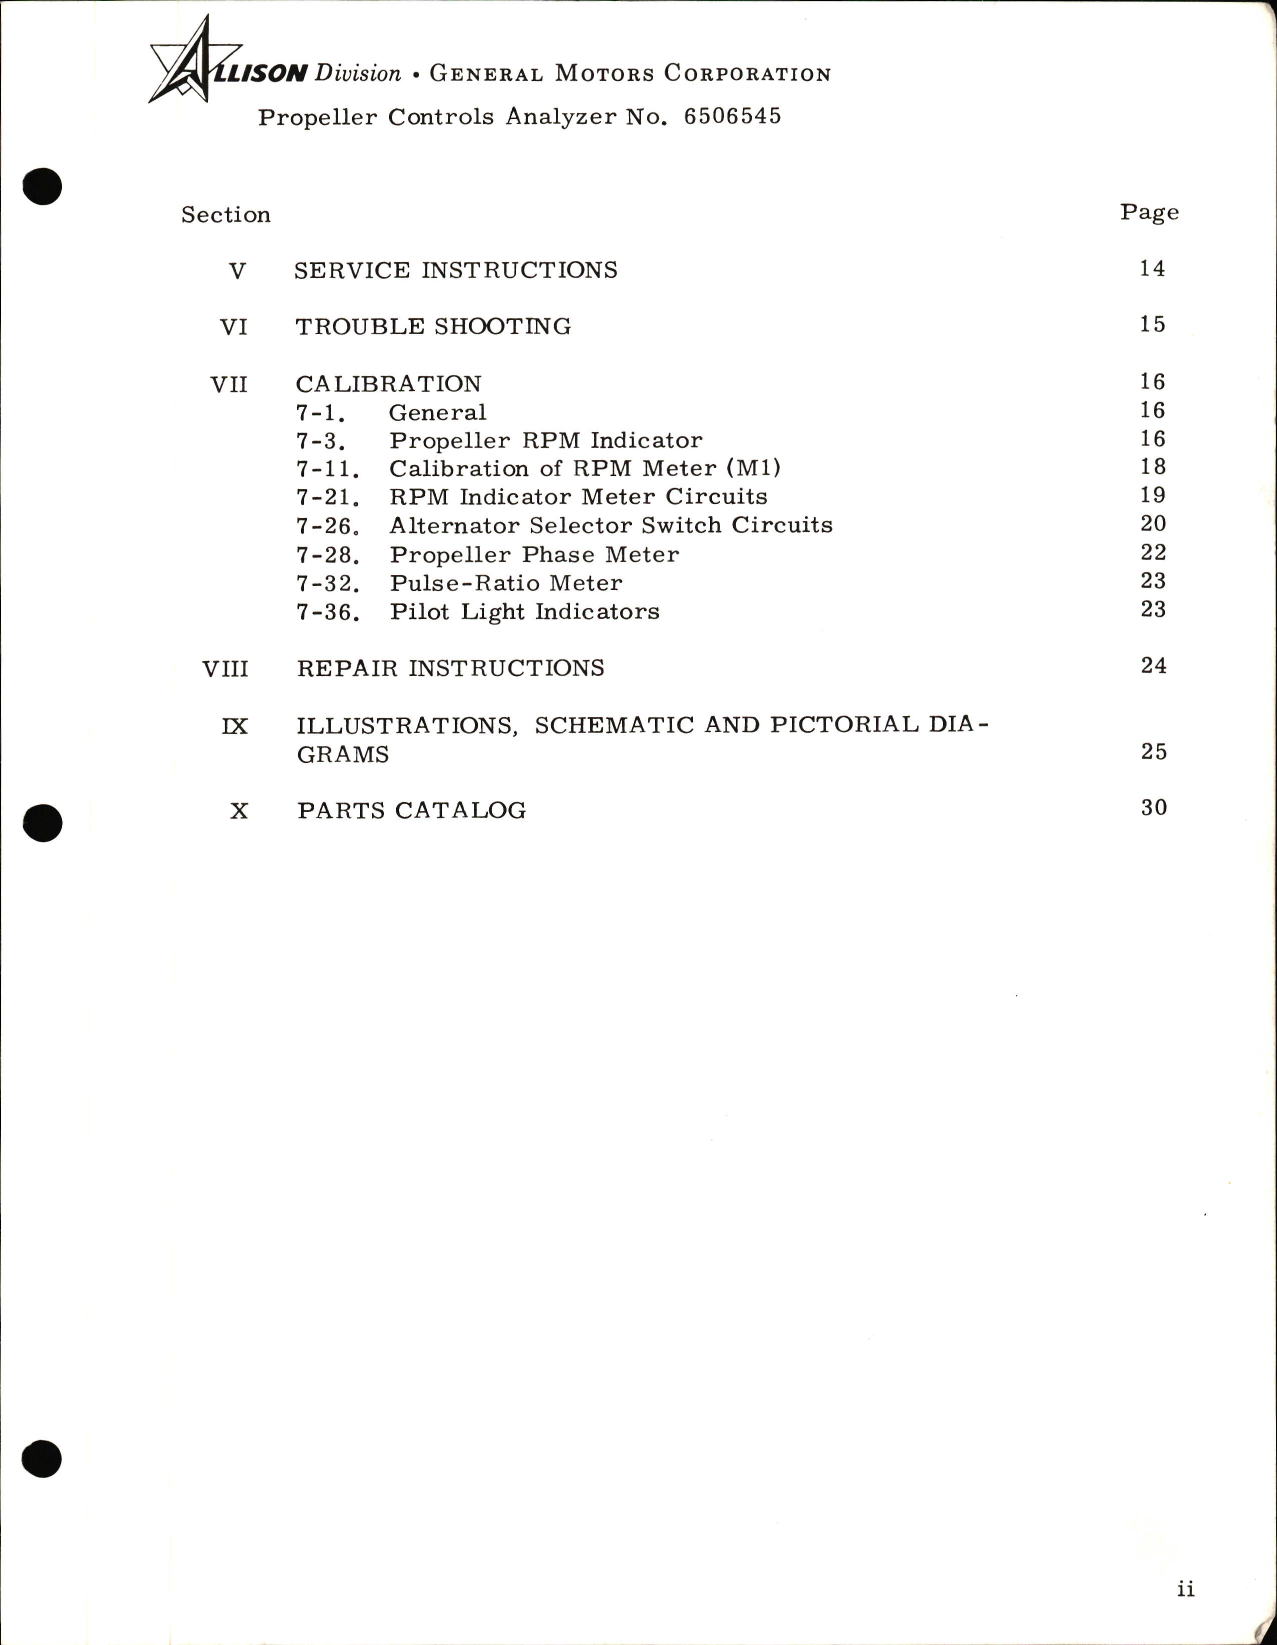 Sample page 5 from AirCorps Library document: Operation & Service Instruction & Parts Catalog for Propeller Electronic Control Analyzer